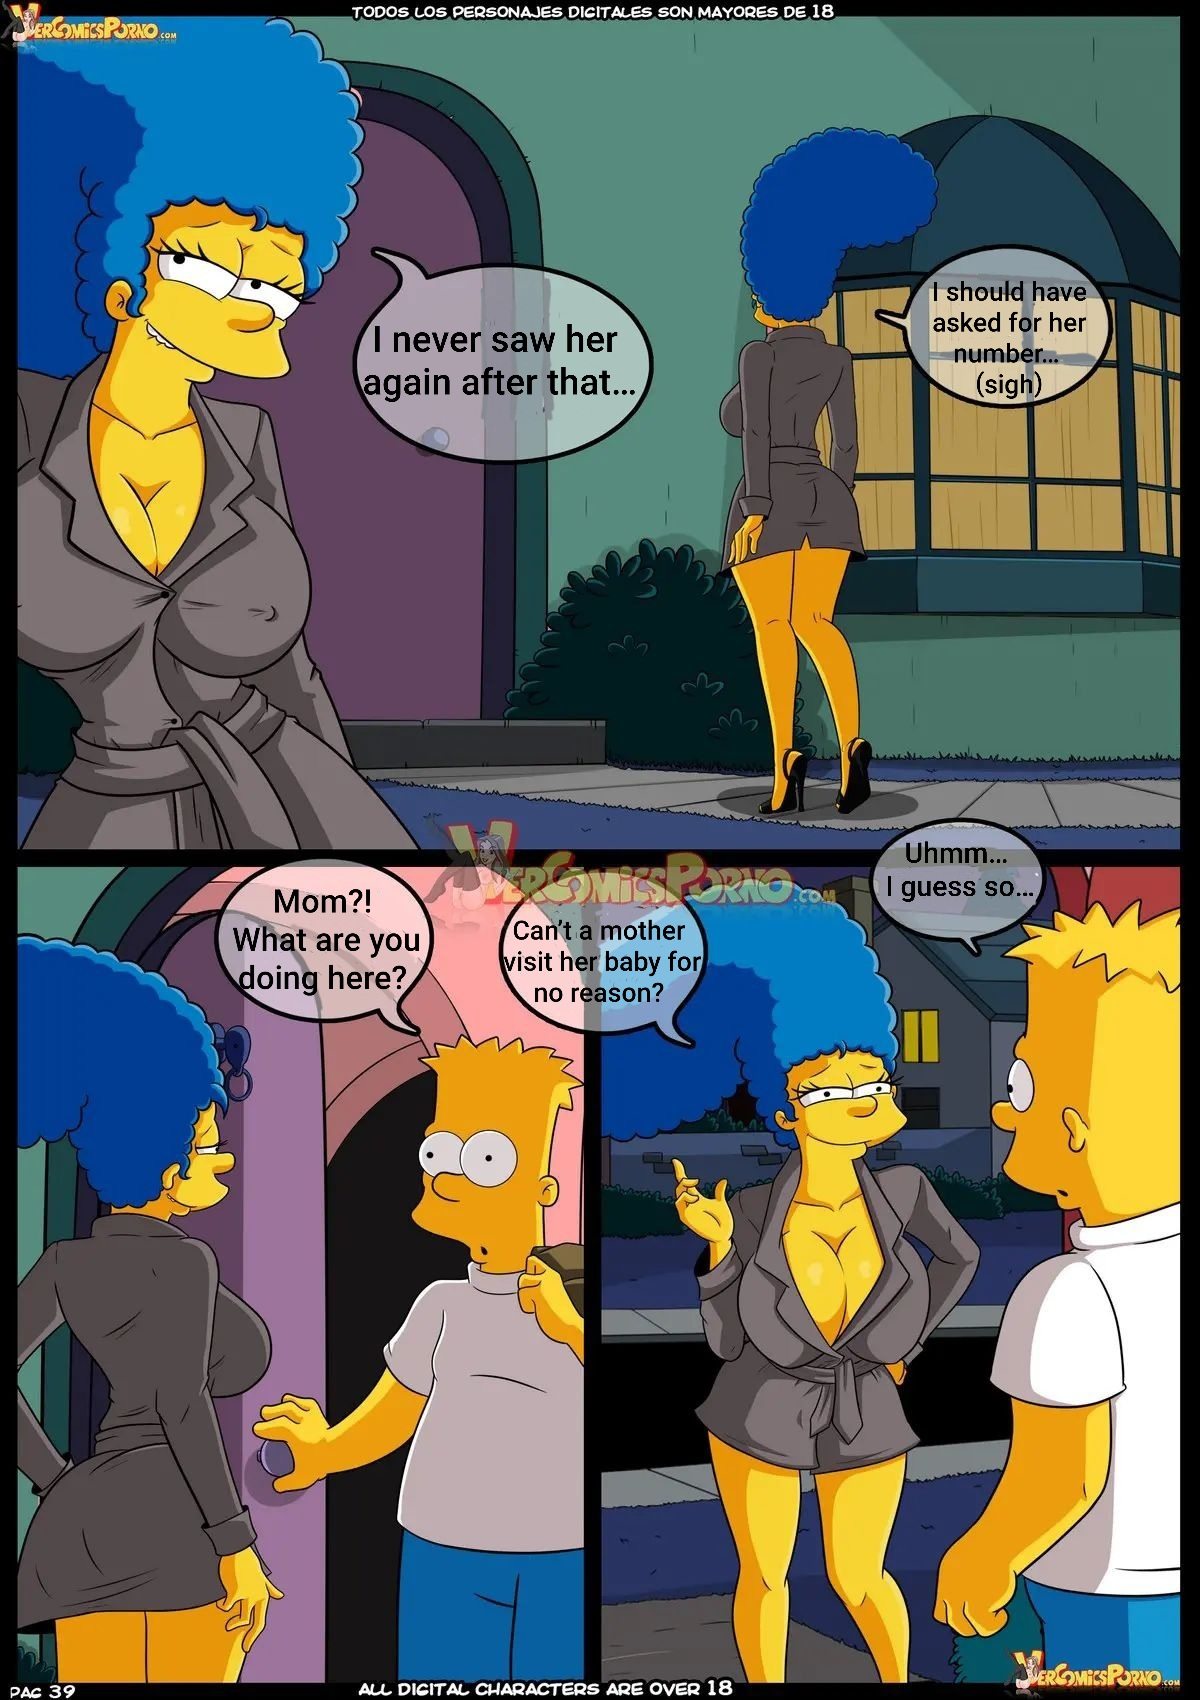 The Simpsons - Old Habits 9 - el final! by Croc English.